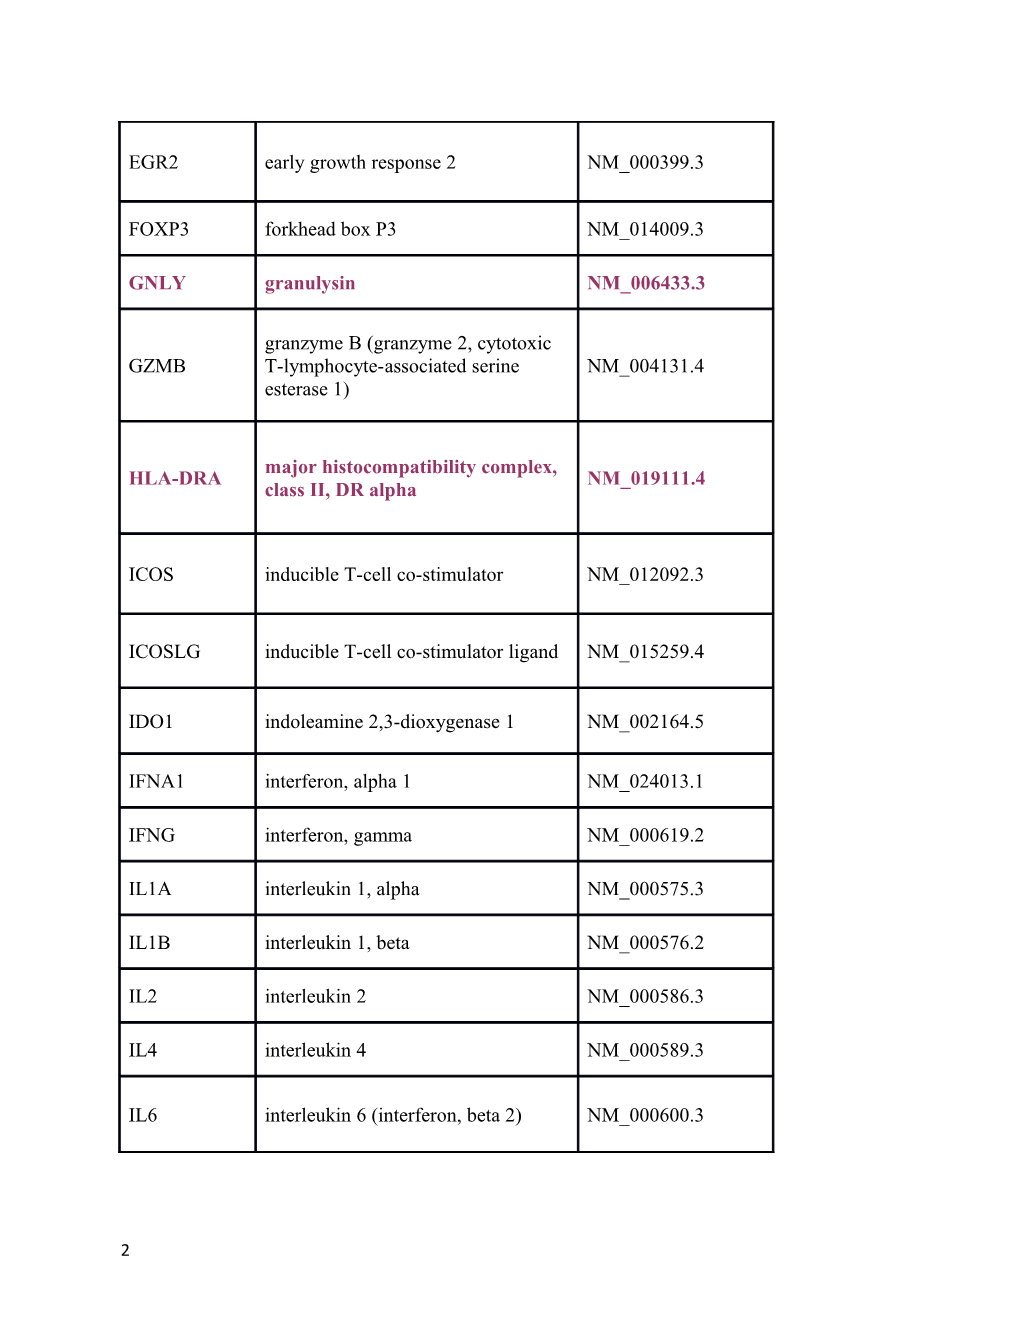 Supplementary Table S1. Genes Selected for Multiplex Qrt-PCR Array